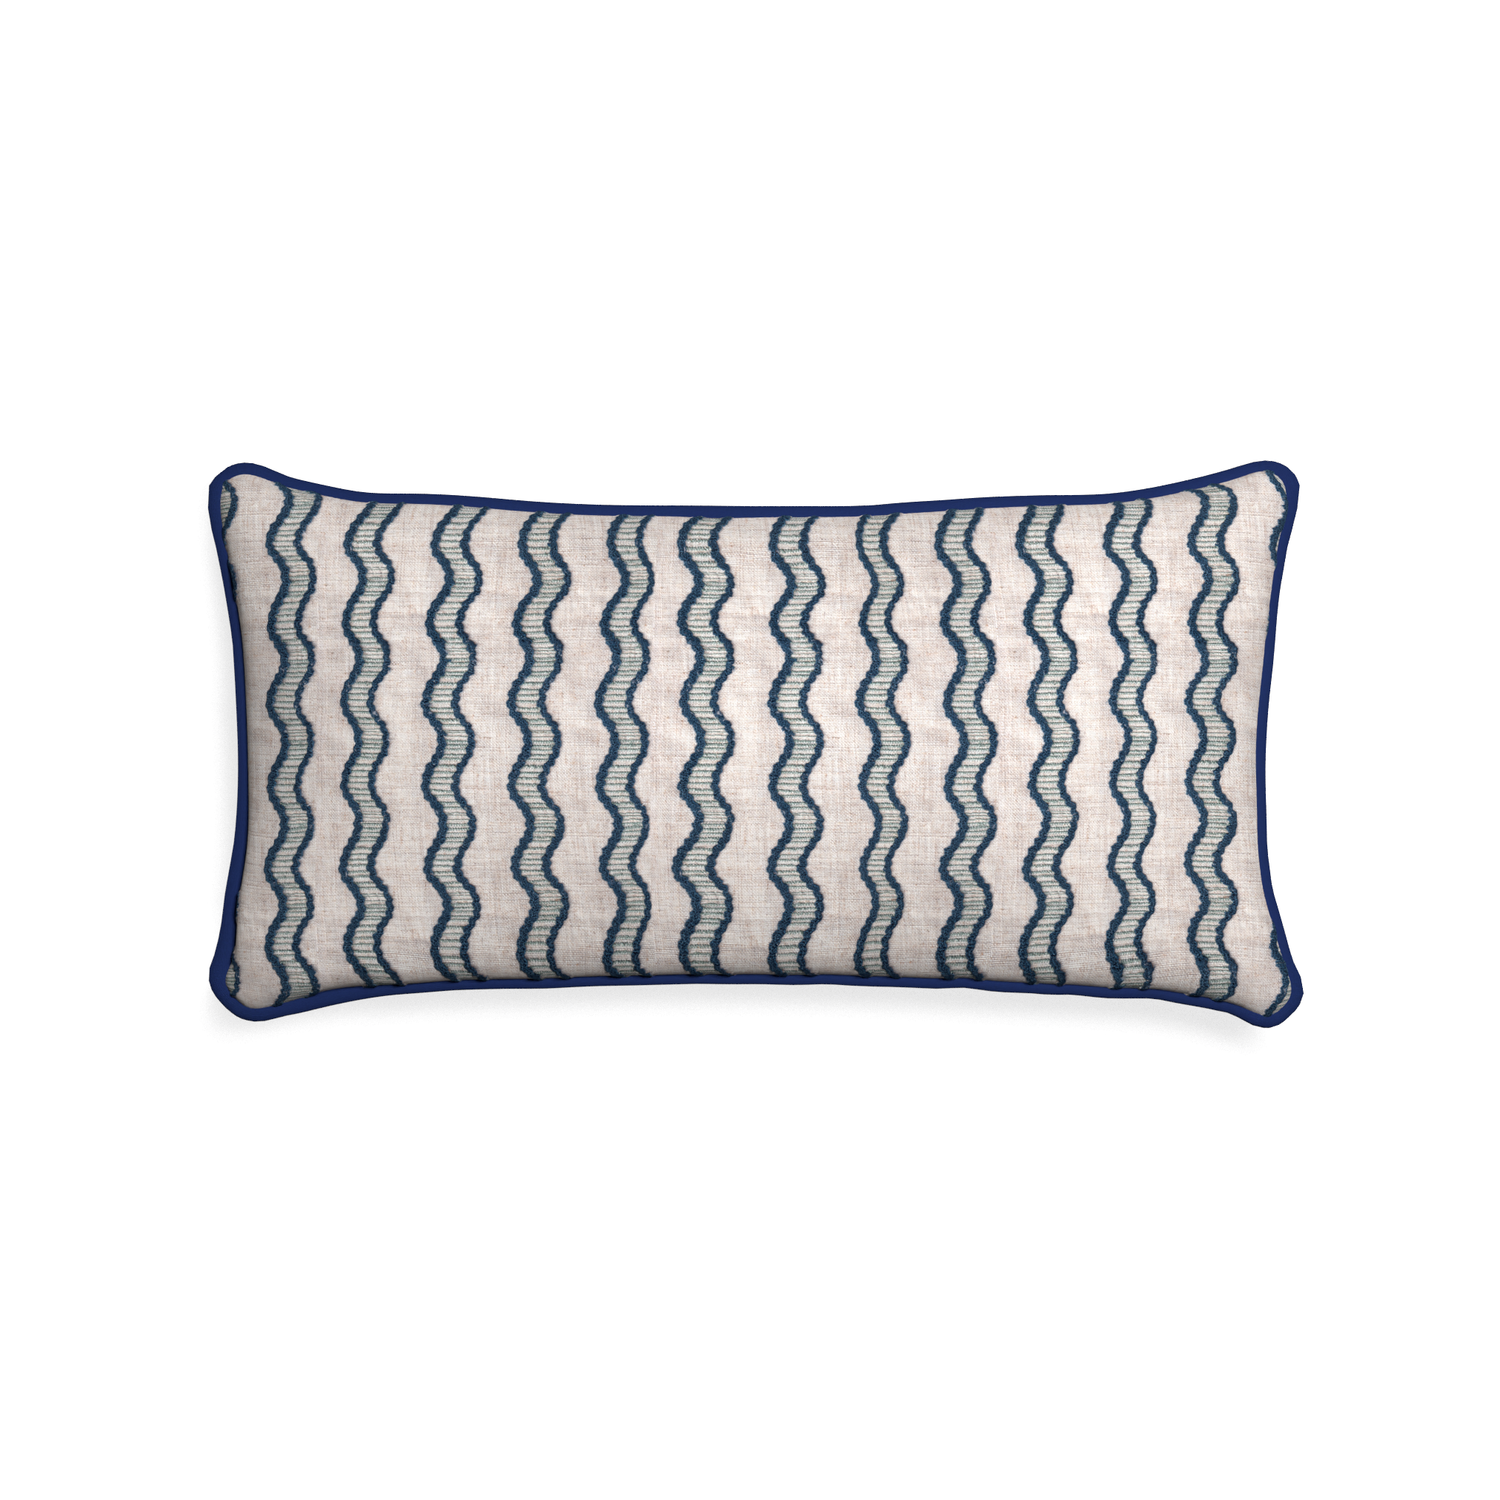 Midi-lumbar beatrice custom embroidered wavepillow with midnight piping on white background